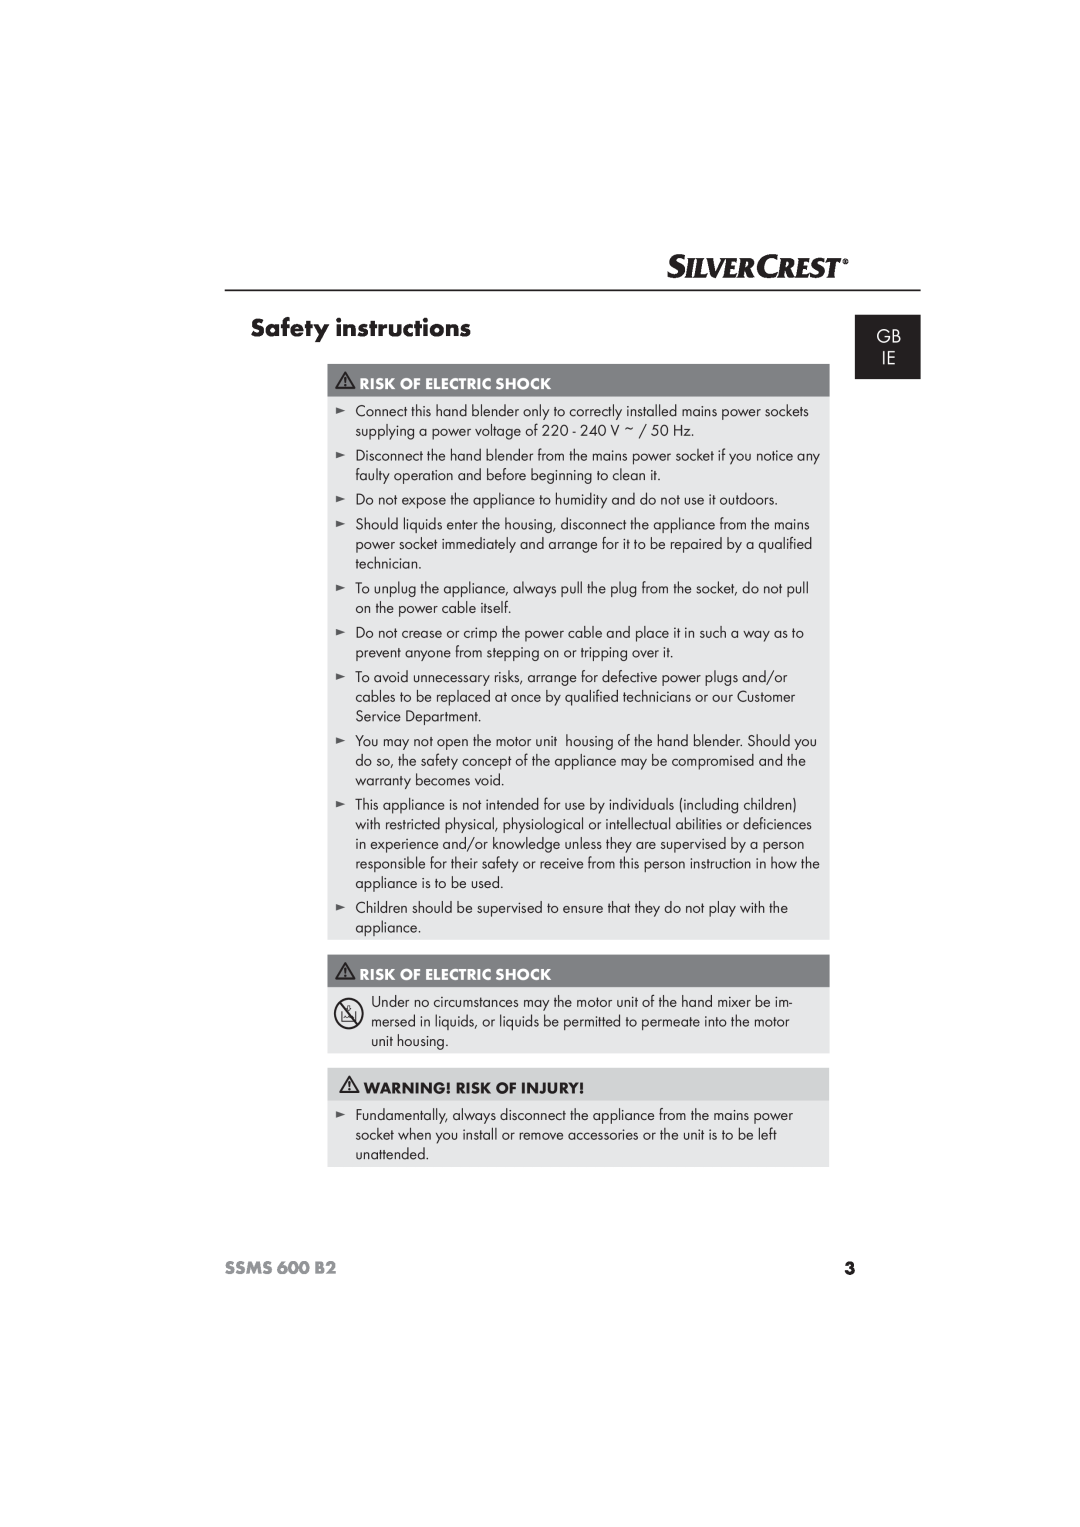 Silvercrest 600 B26 manual Safety instructions, Gb Ie, SSMS 600 B2, Risk Of Electric Shock 